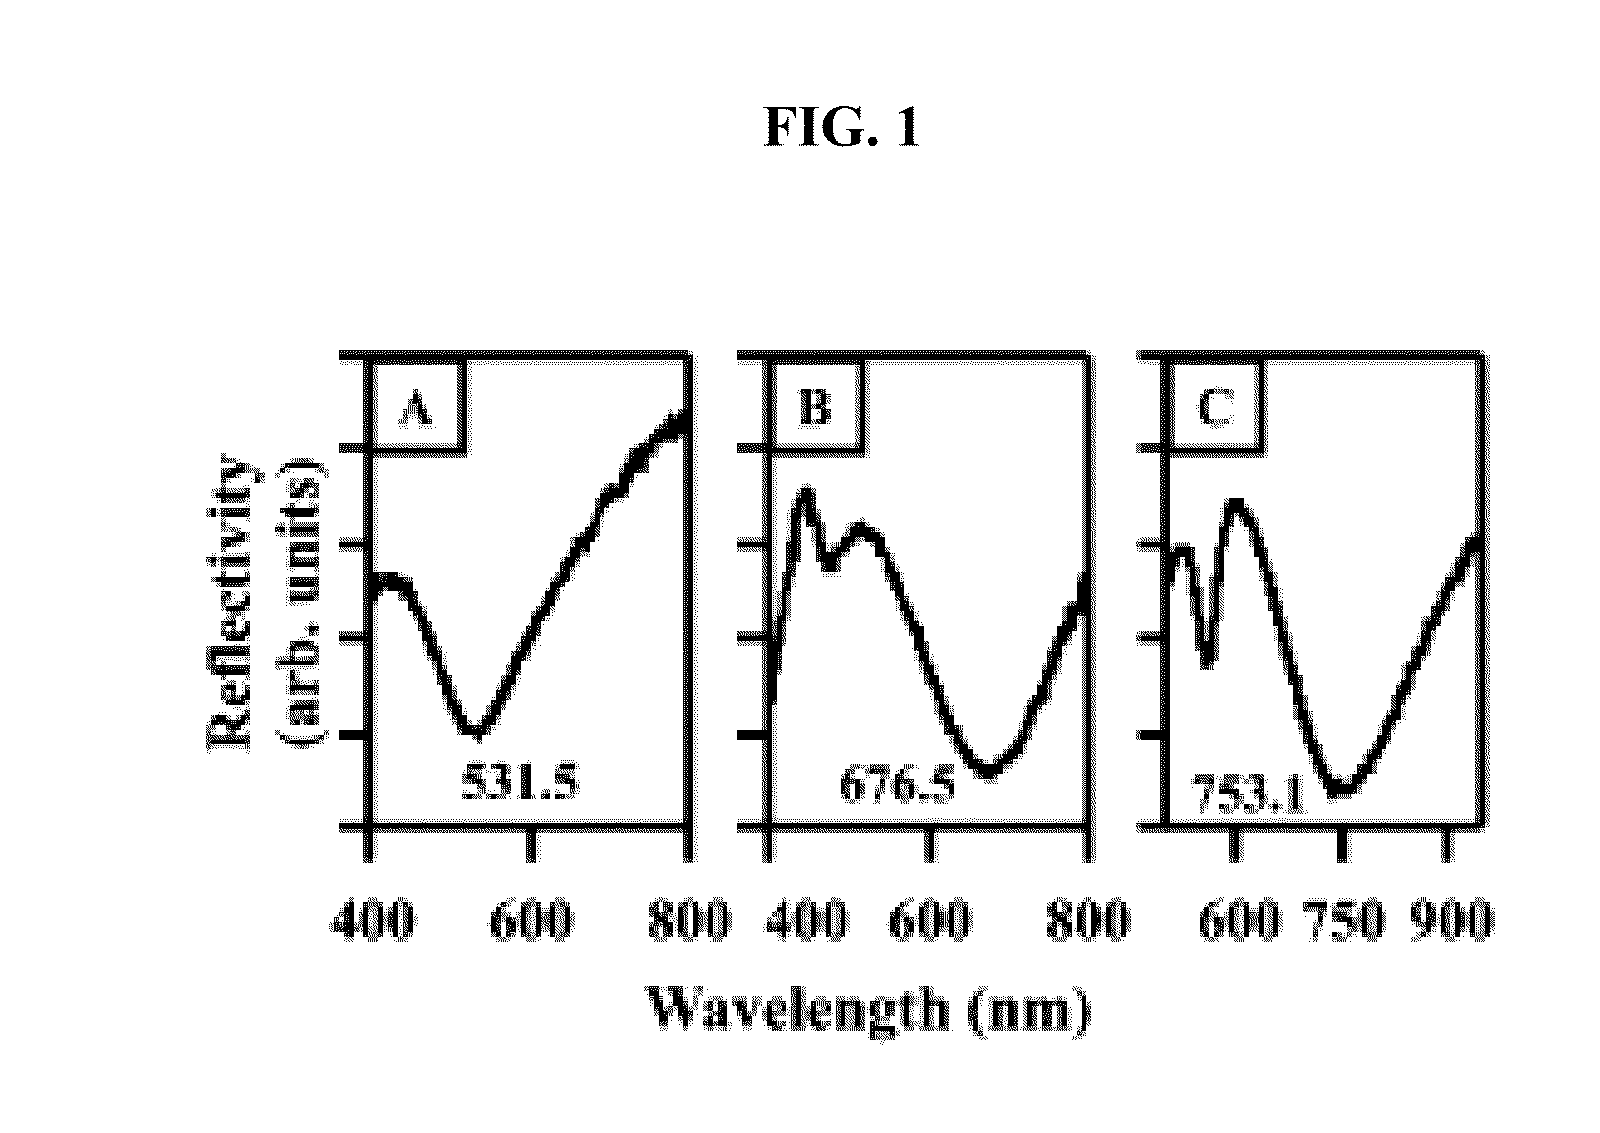 Compositions, Devices And Methods For SERS And LSPR